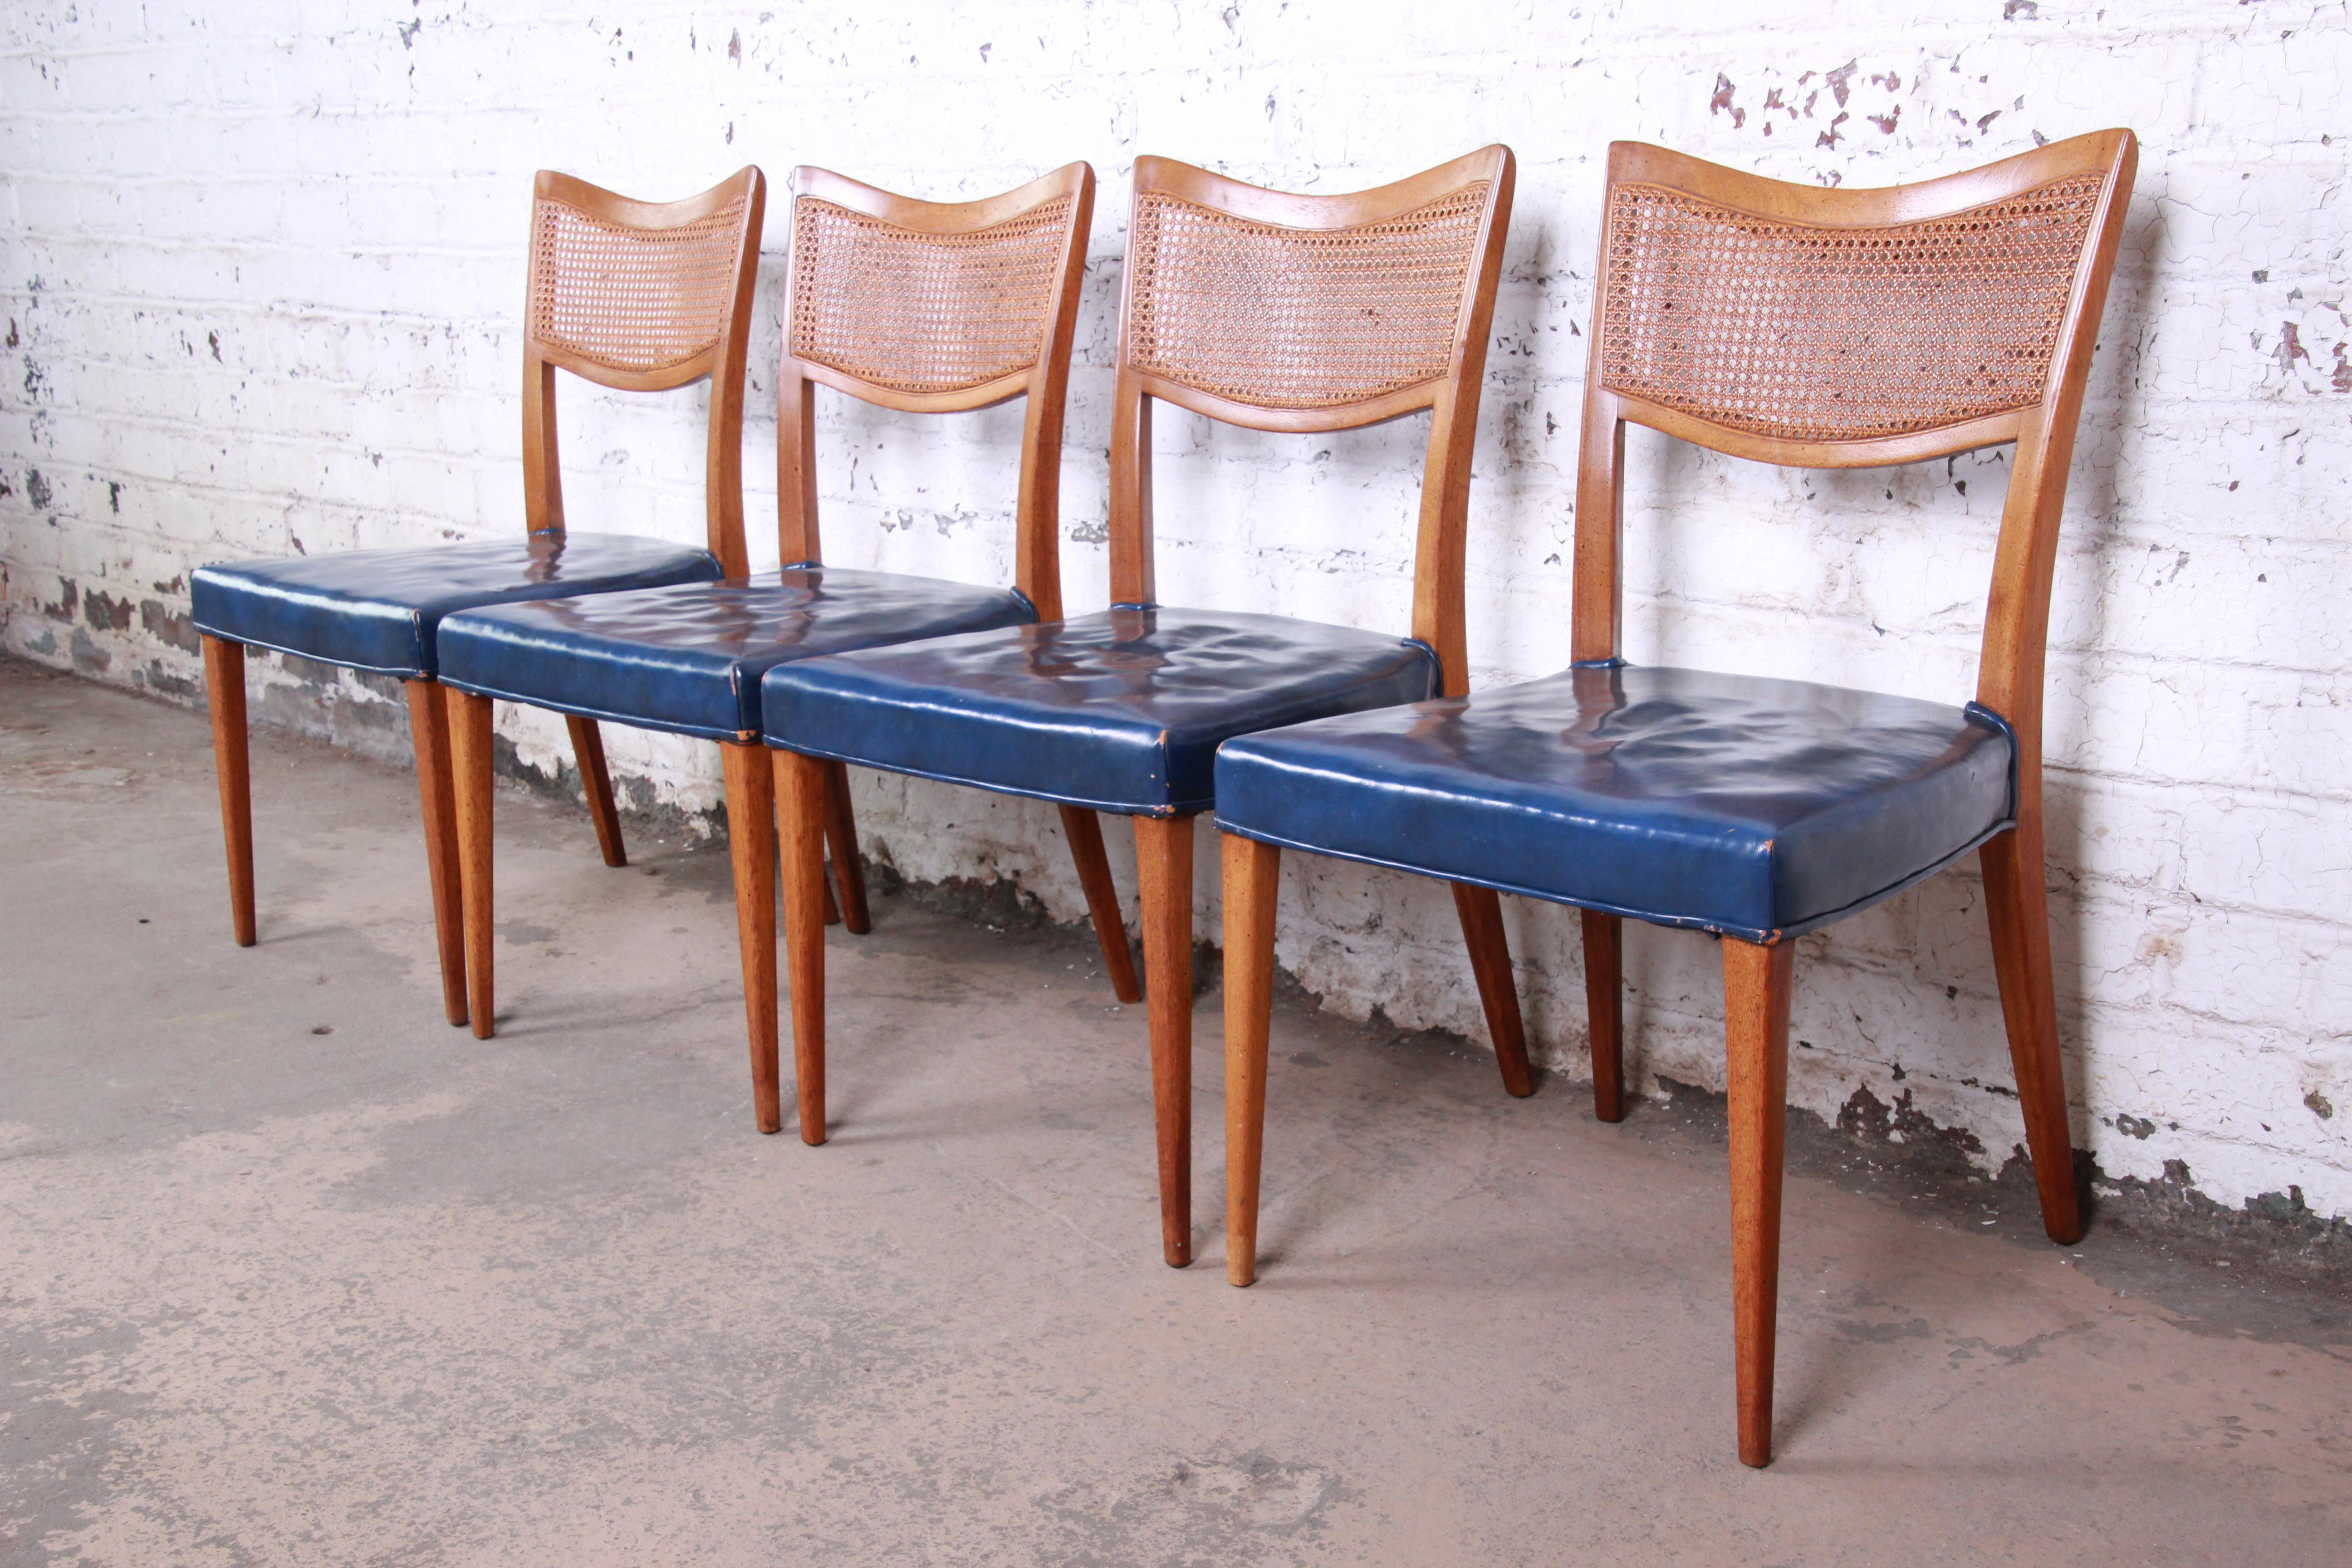 A gorgeous set of four Mid-Century Modern dining chairs by Harvey Probber. The chairs feature sleek solid mahogany frames with curved caned seat backs. Very similar to designs by Paul McCobb. The original upholstery shows wear, and there is some